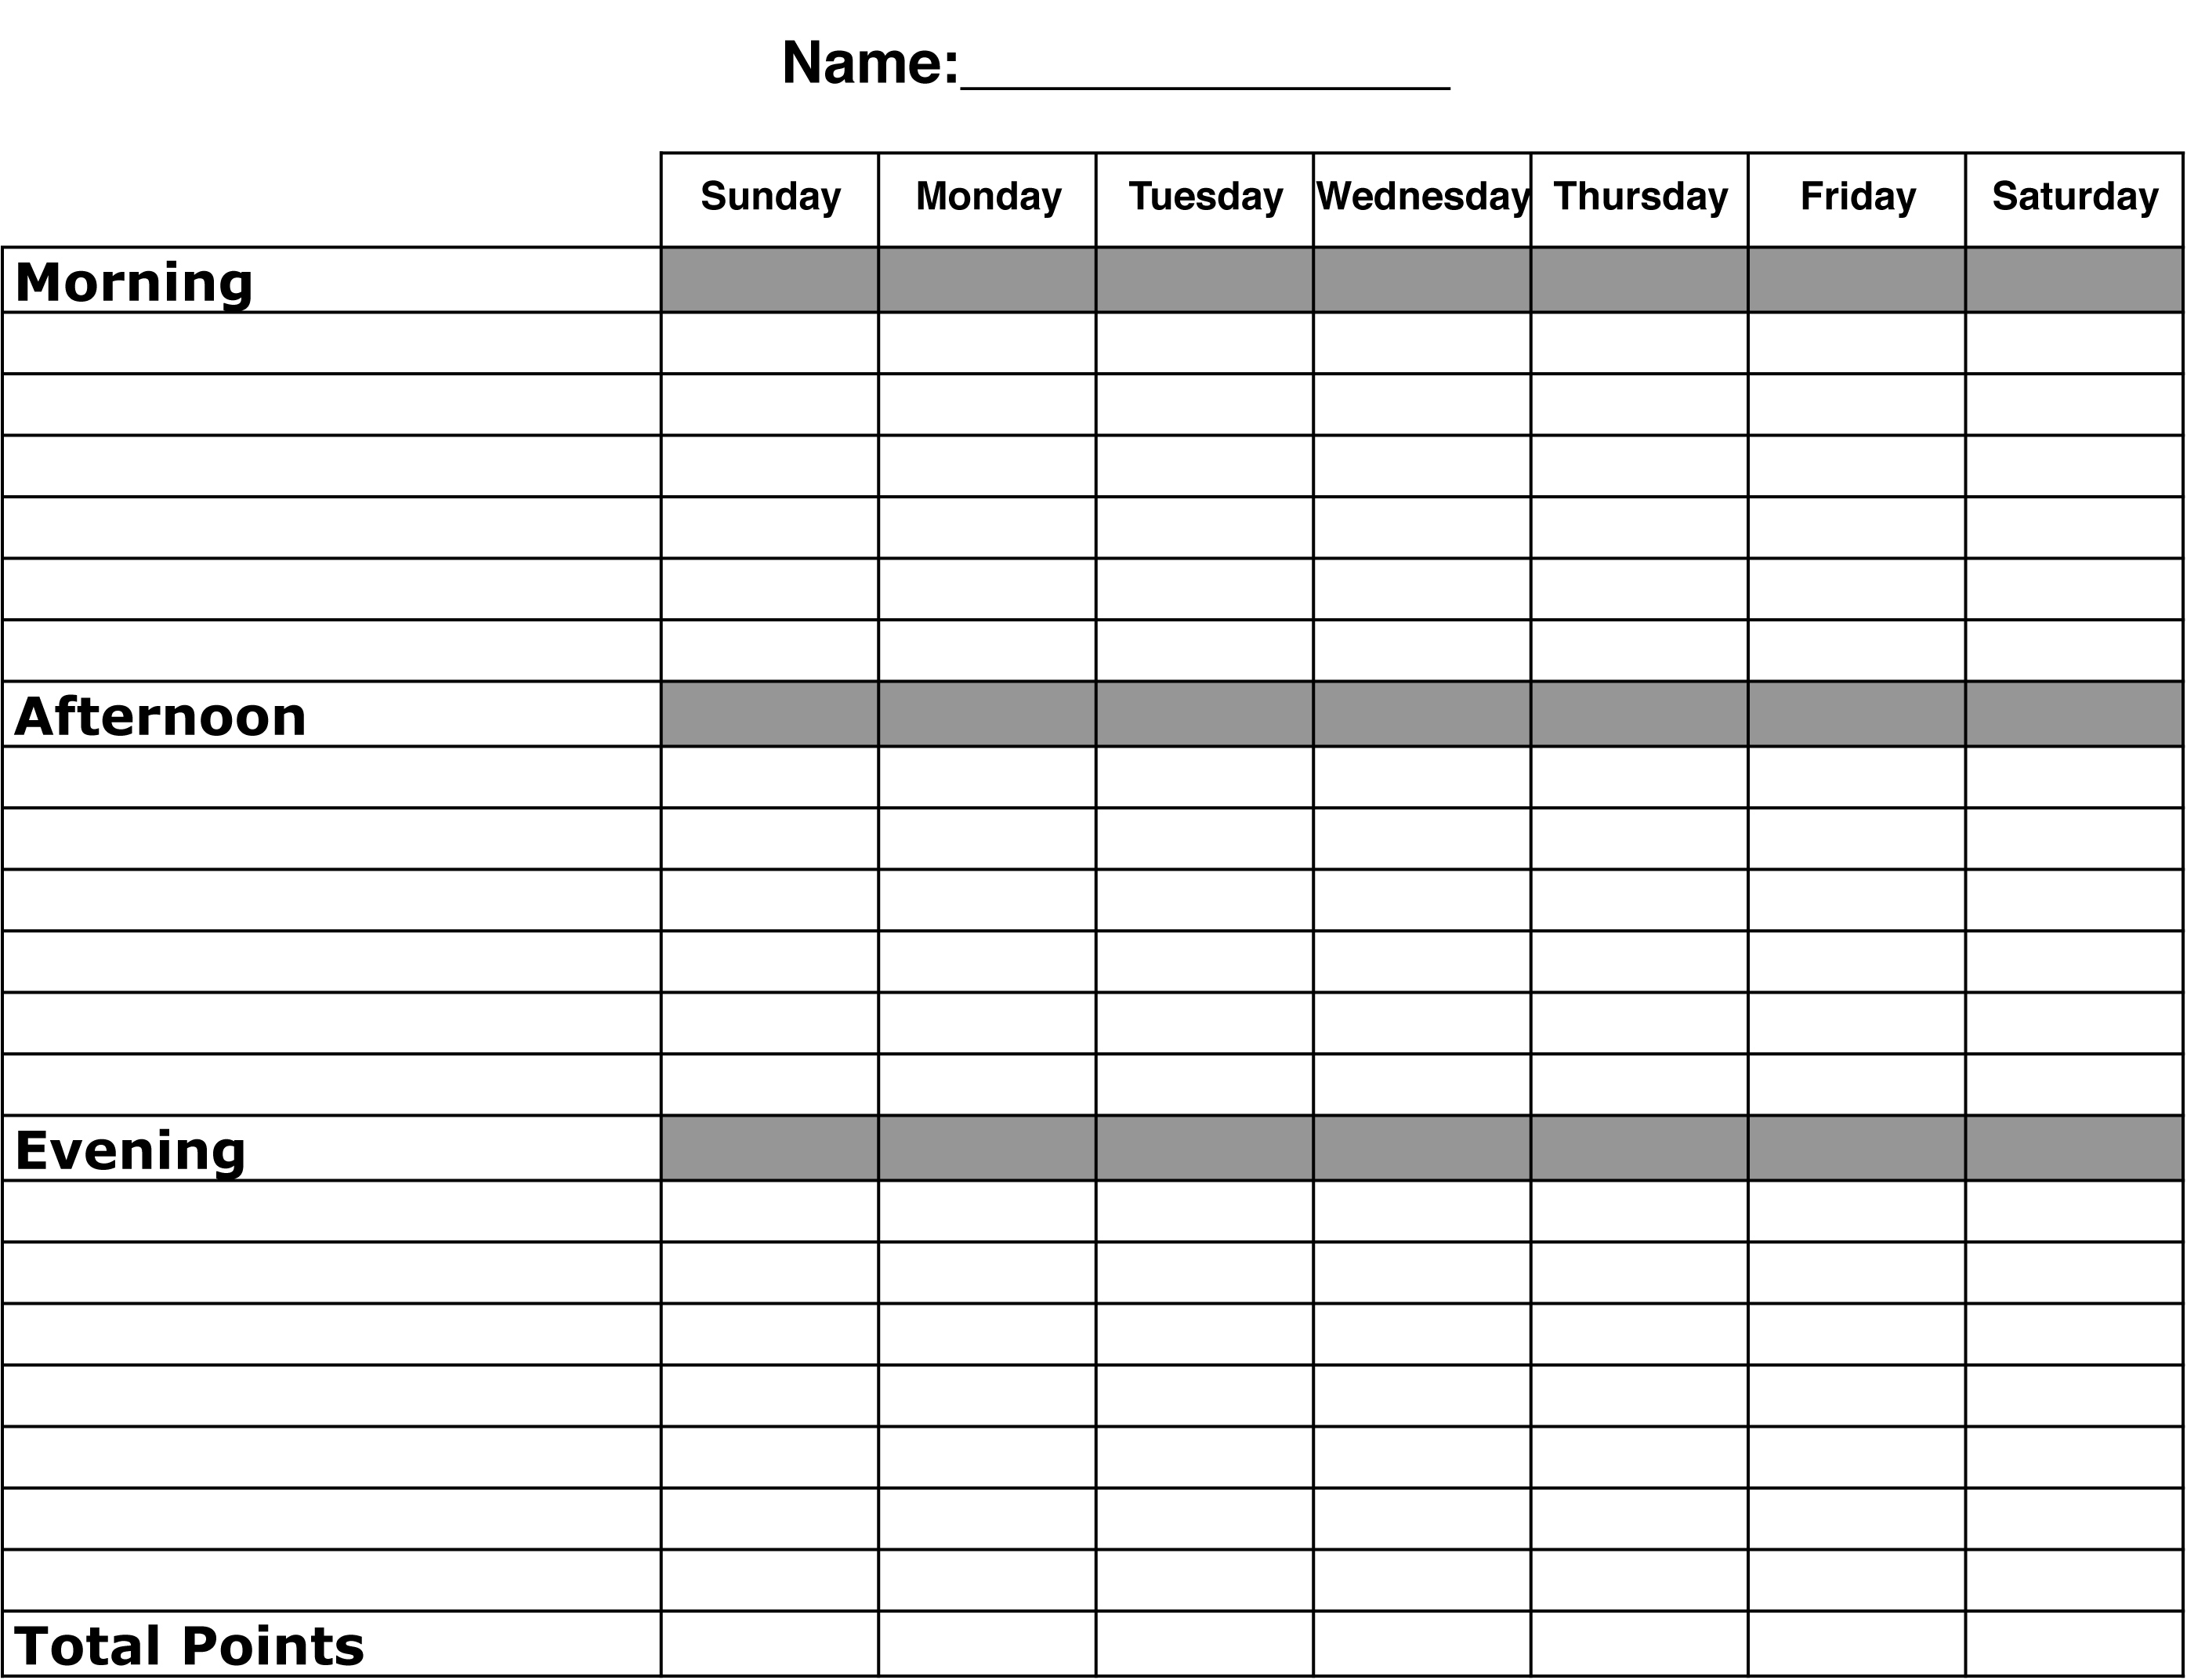 free-downloadable-weekly-cleaning-checklist